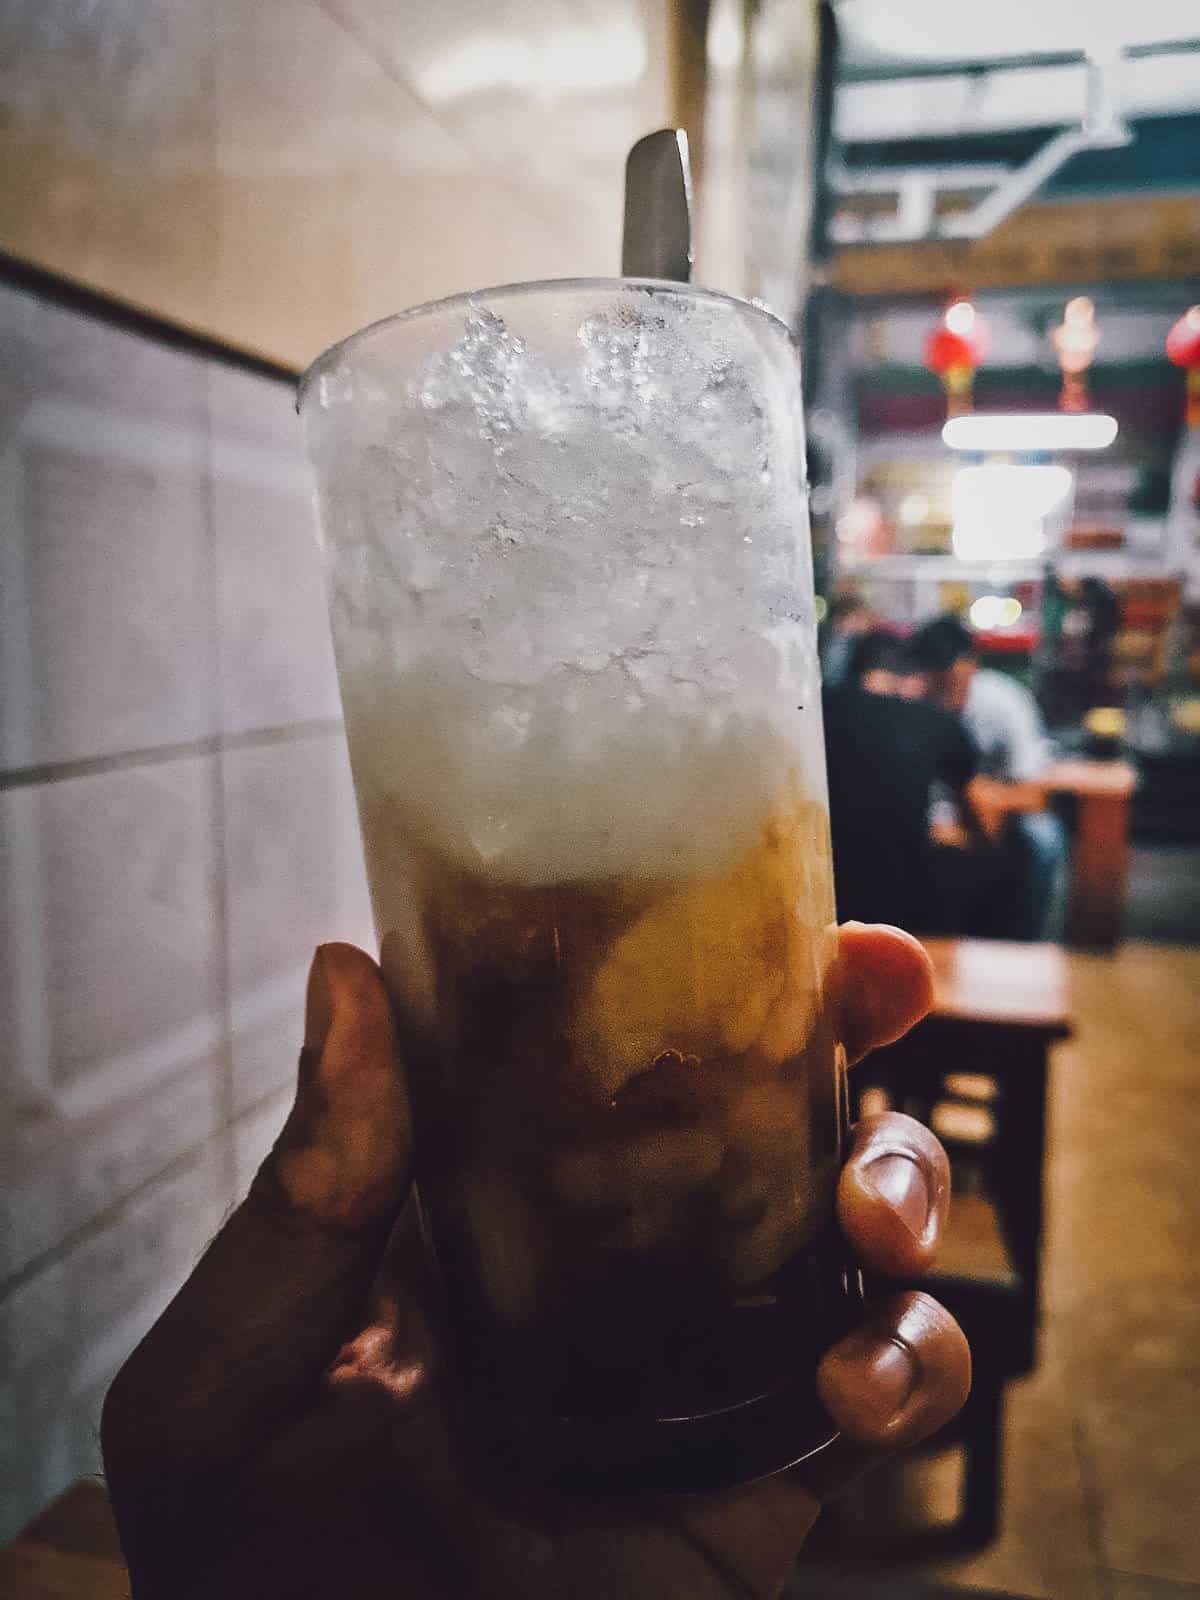 Glass of che at a restaurant in Hue, Vietnam